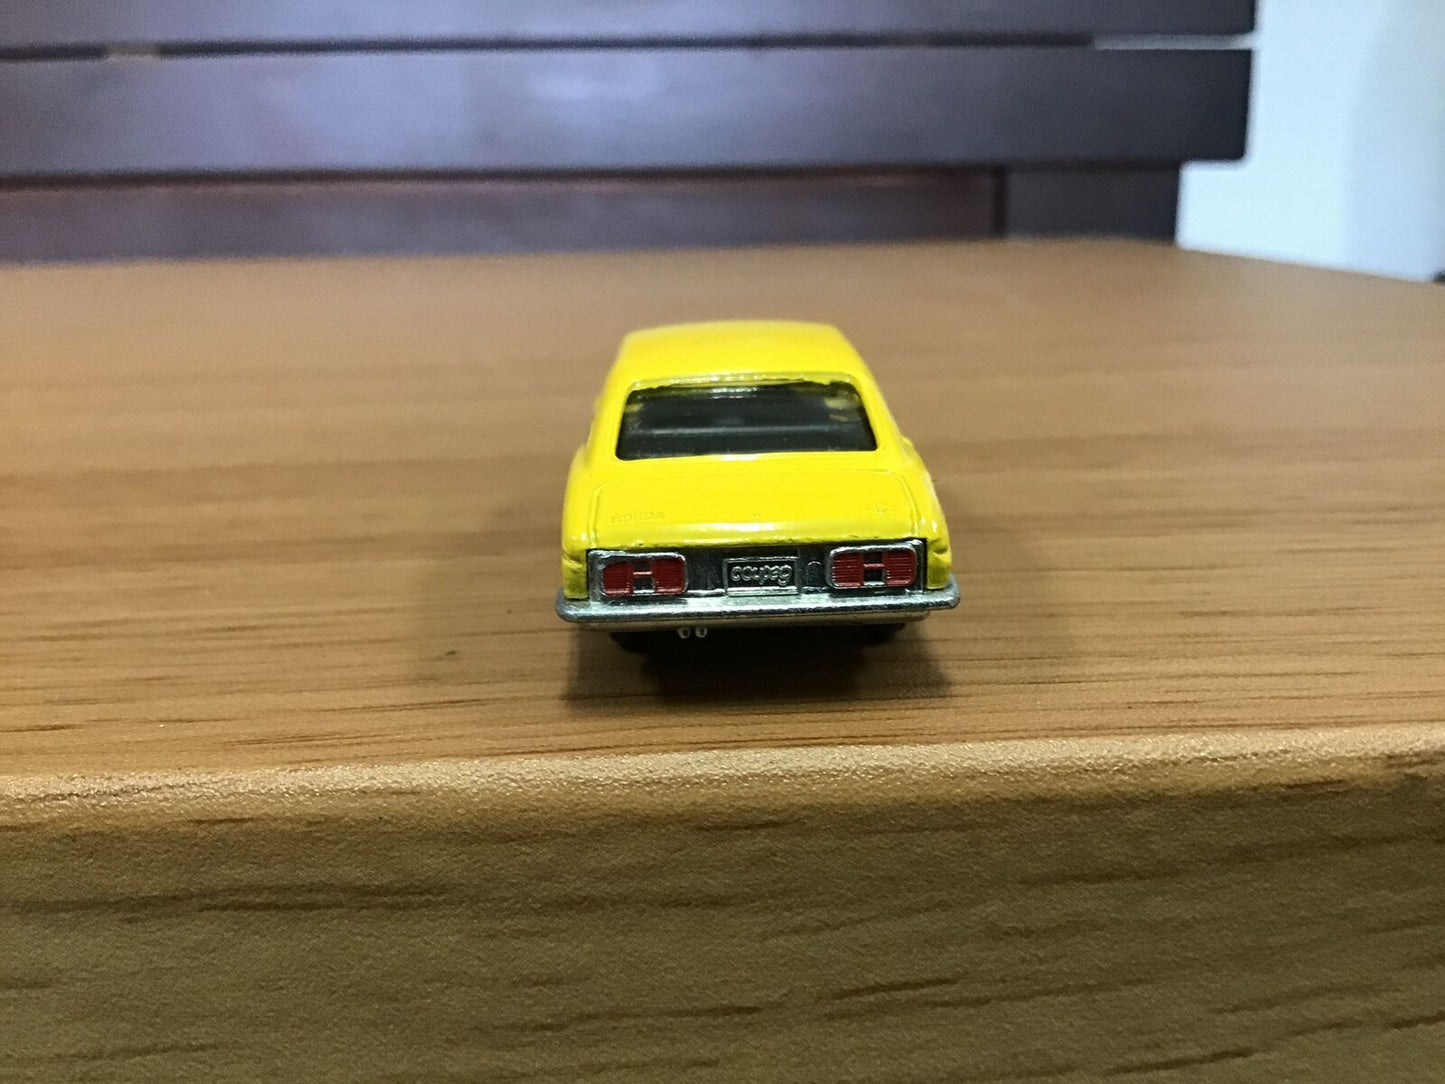 Y0128 TOMICA DM25 1300 Coupe 9 YL TAKARA TOMY vintage mini car from Japan rare